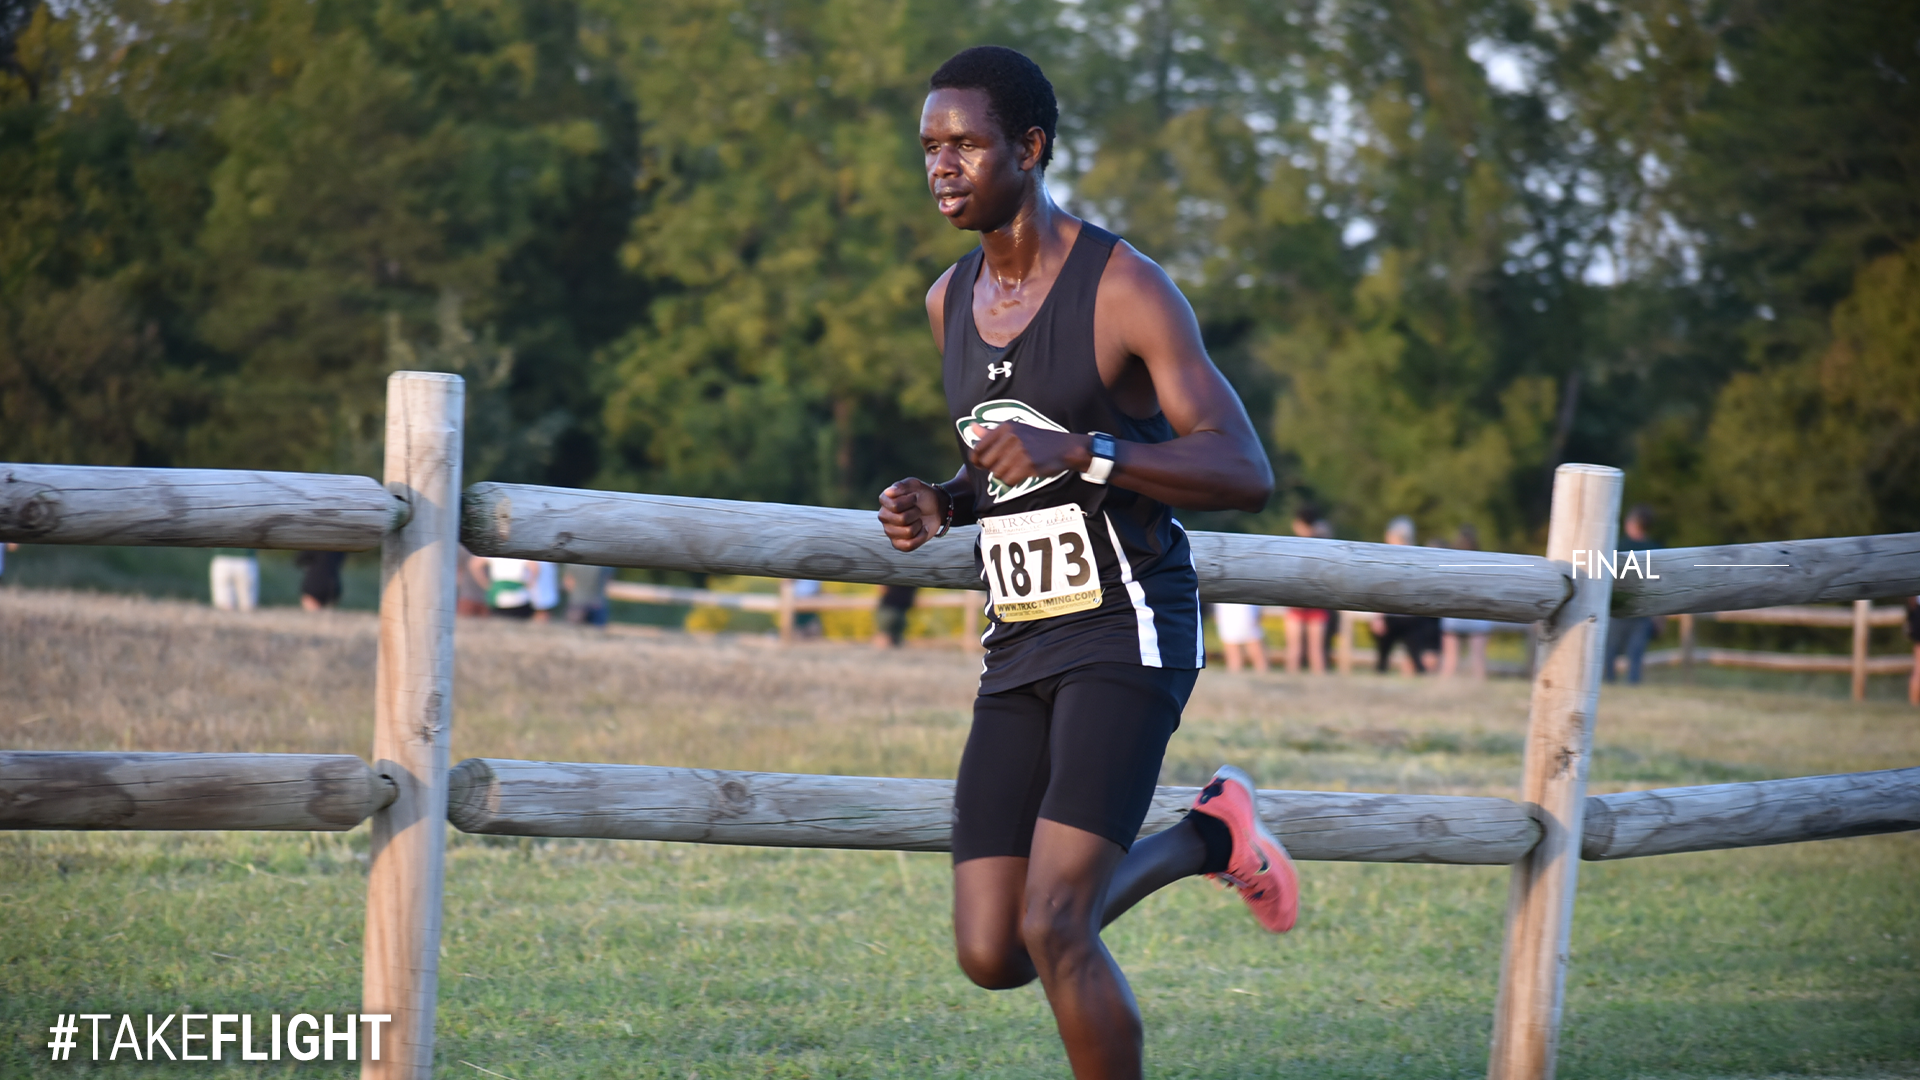 Men Place Second, Three Eagles Land in Top 10 of St. Louis Fall Classic